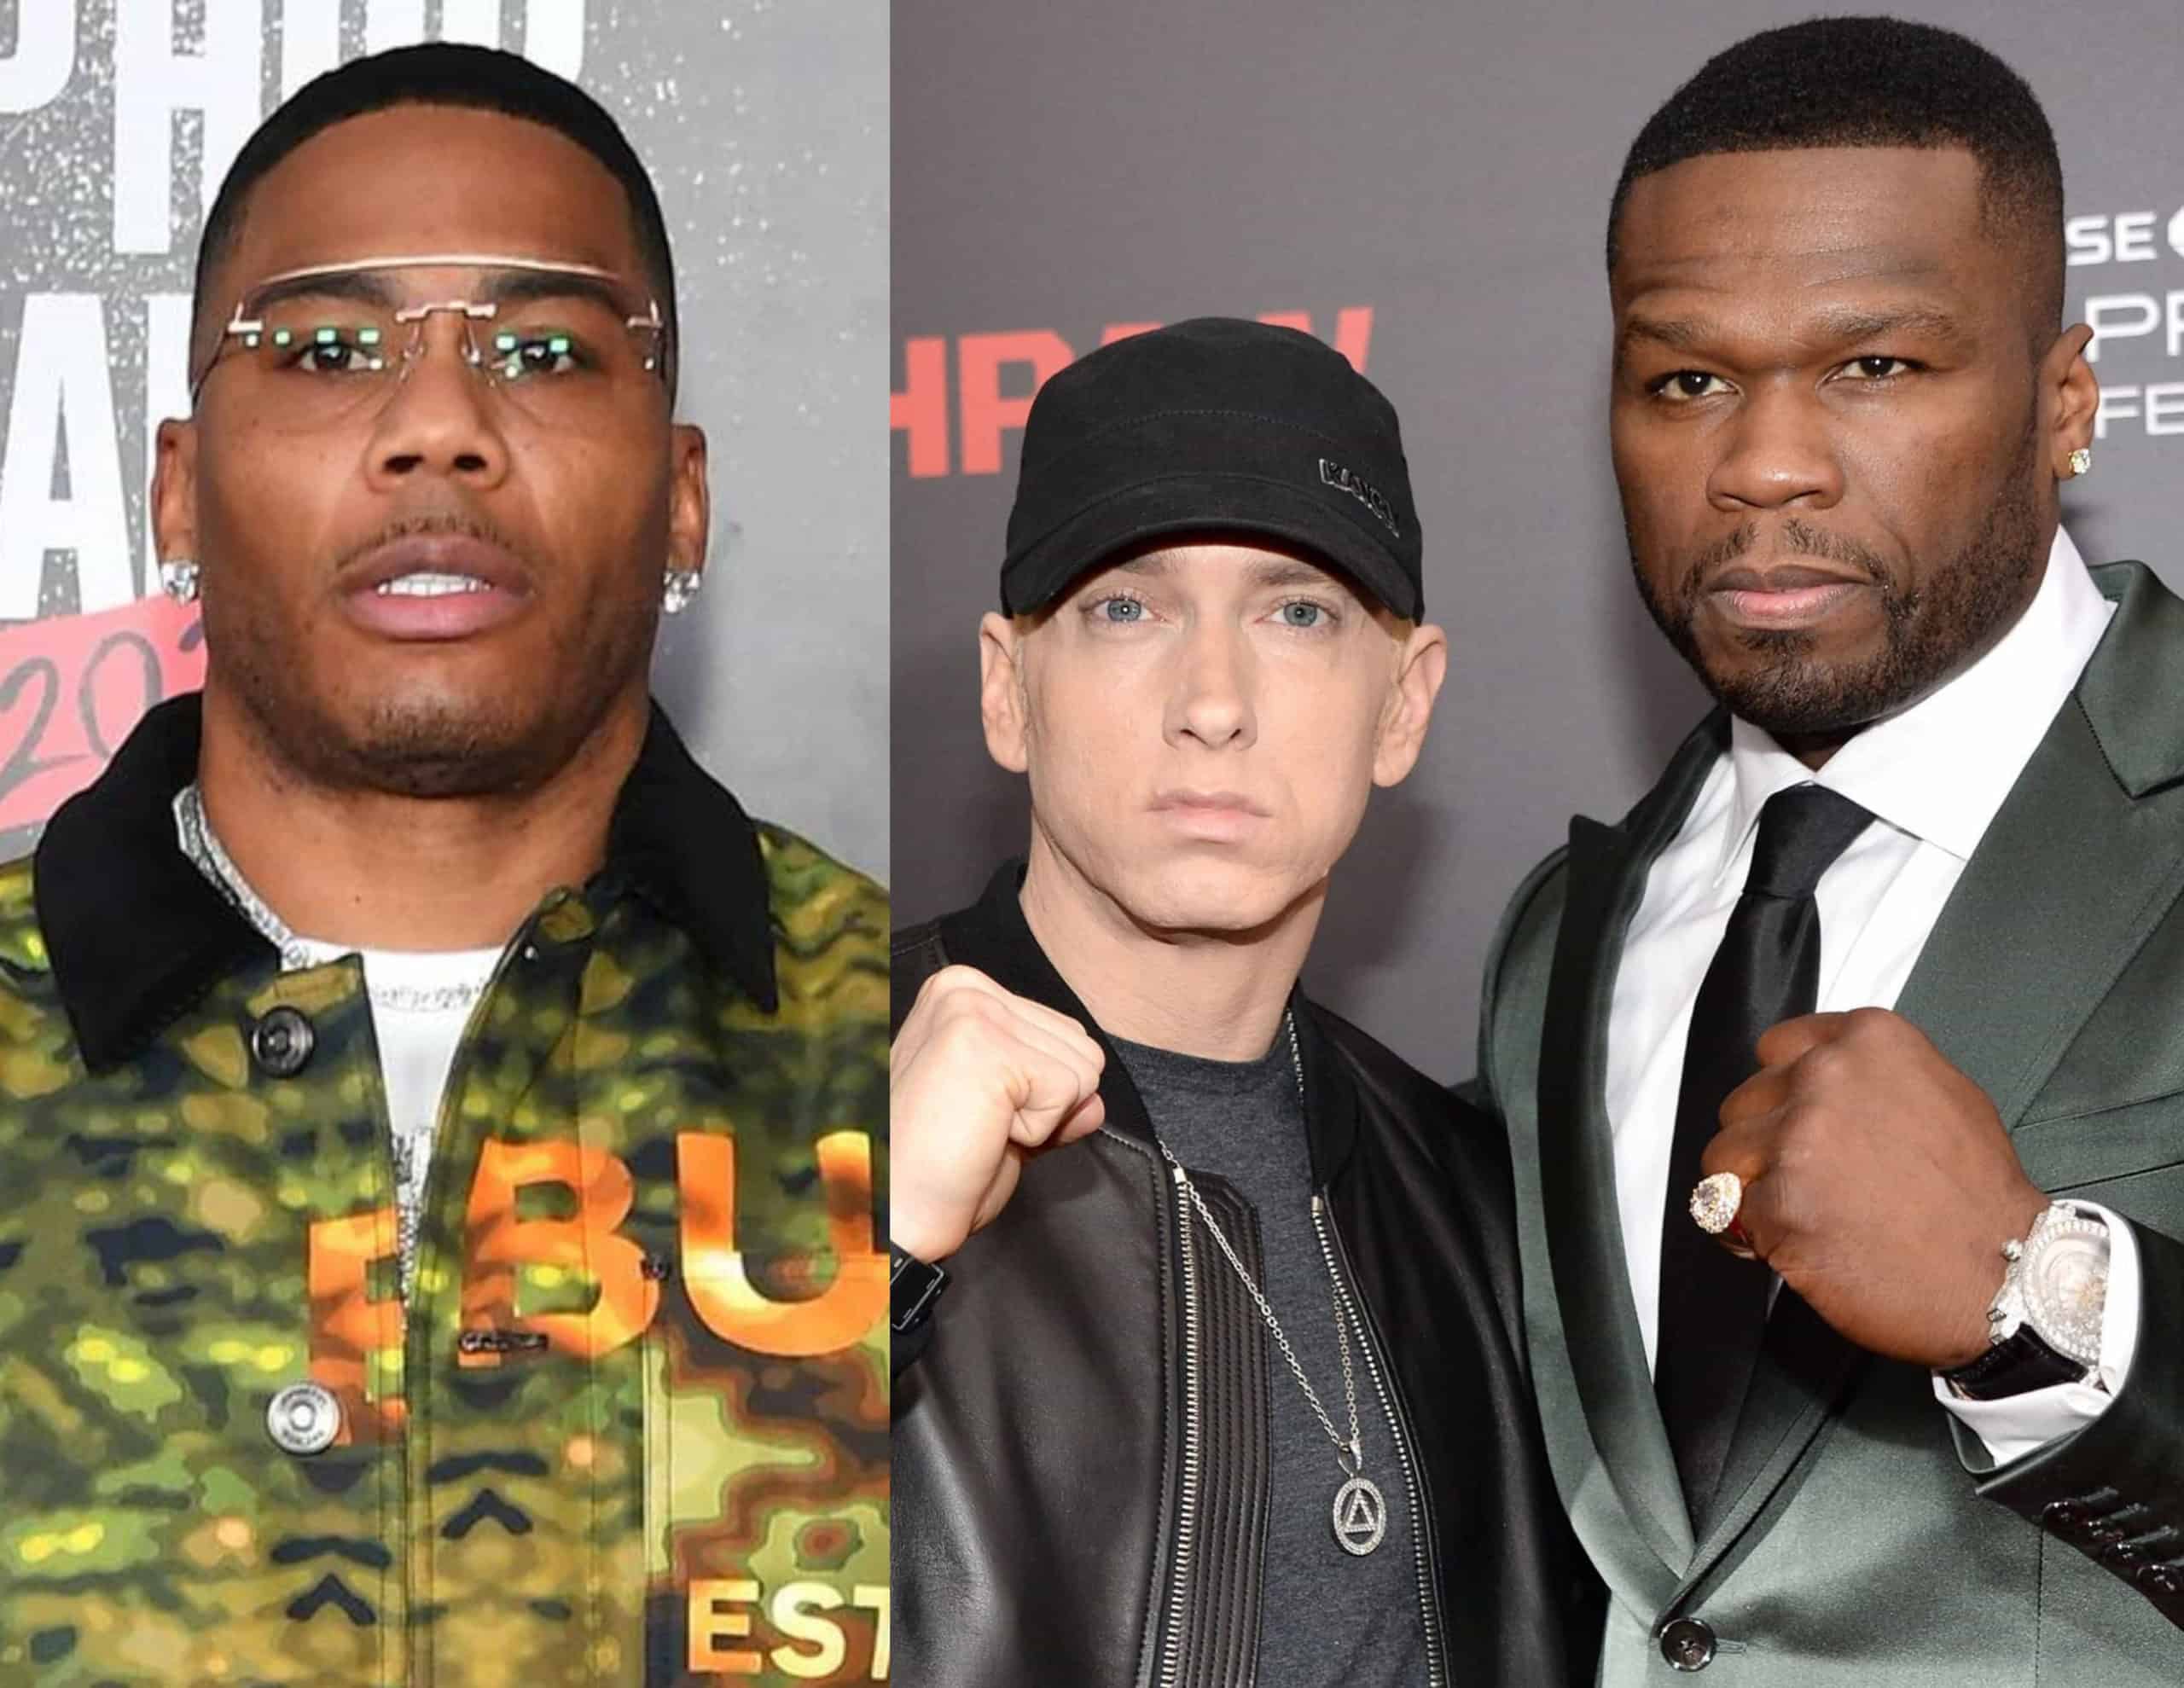 Nelly Says He Had No Support In His Career Like Eminem, 50 Cent & More